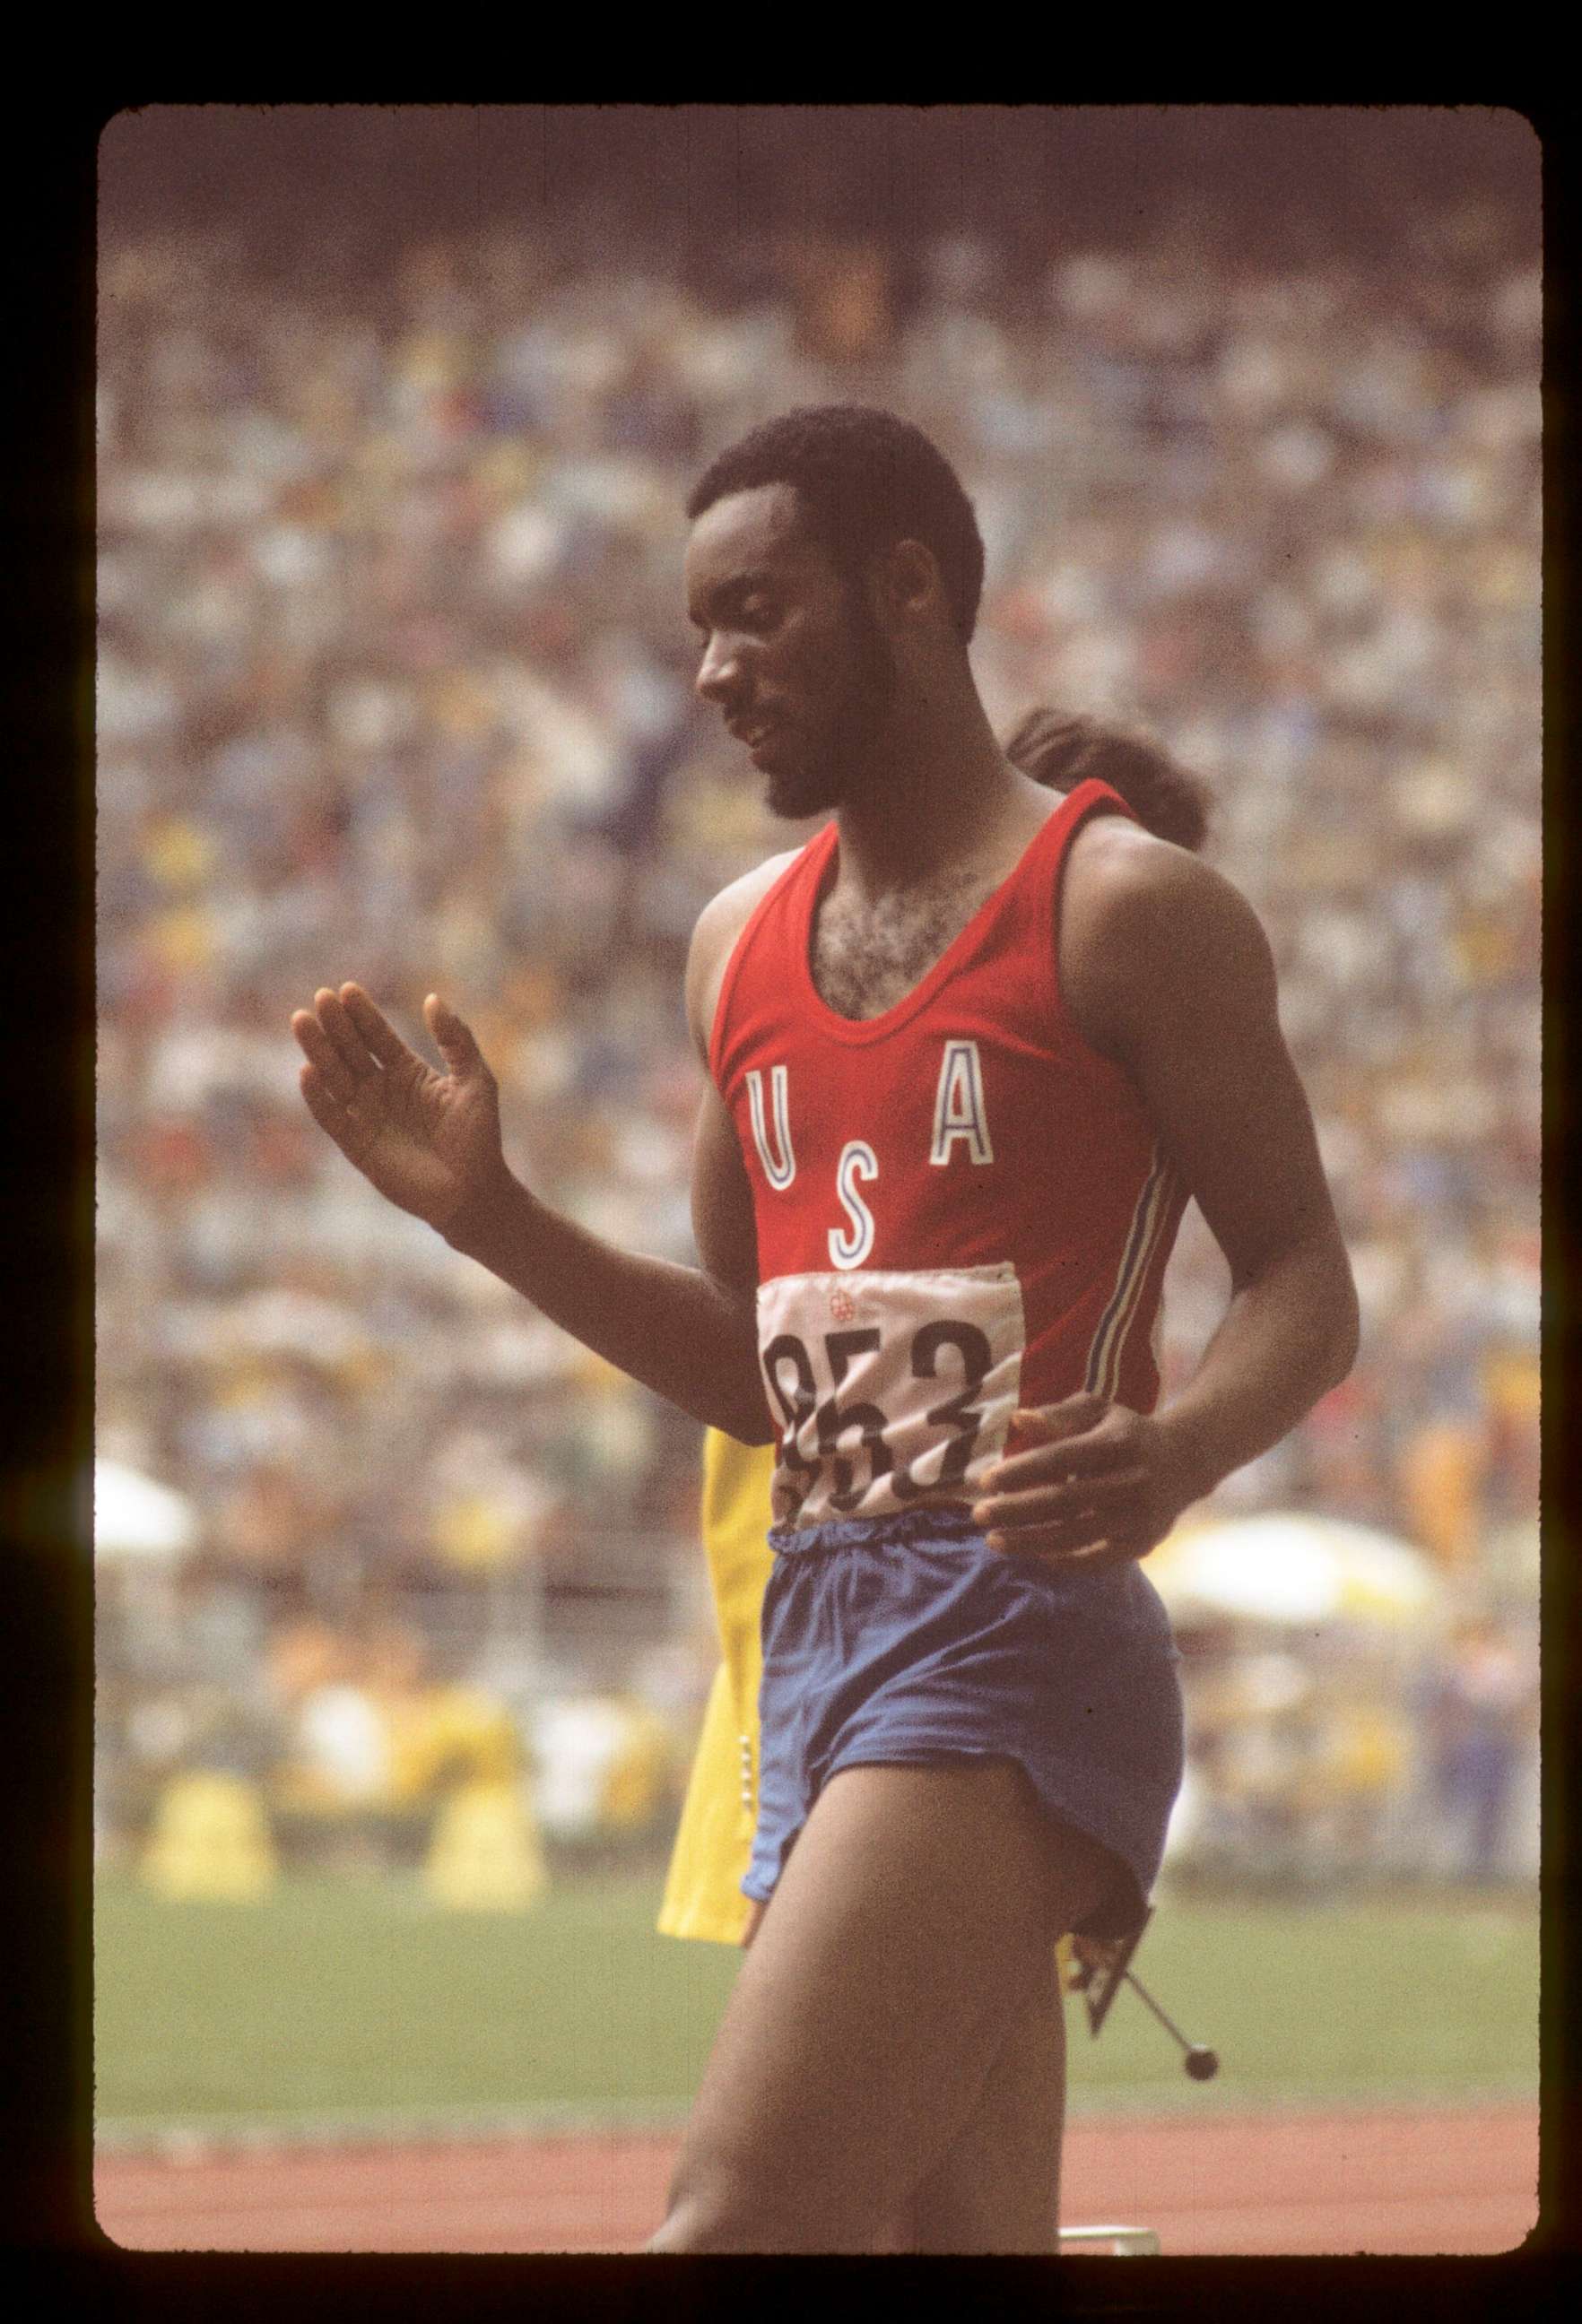 PHOTO: Arnie Robinson competes in the Men's Long Jump during the Summer Olympics, July 29, 1976.